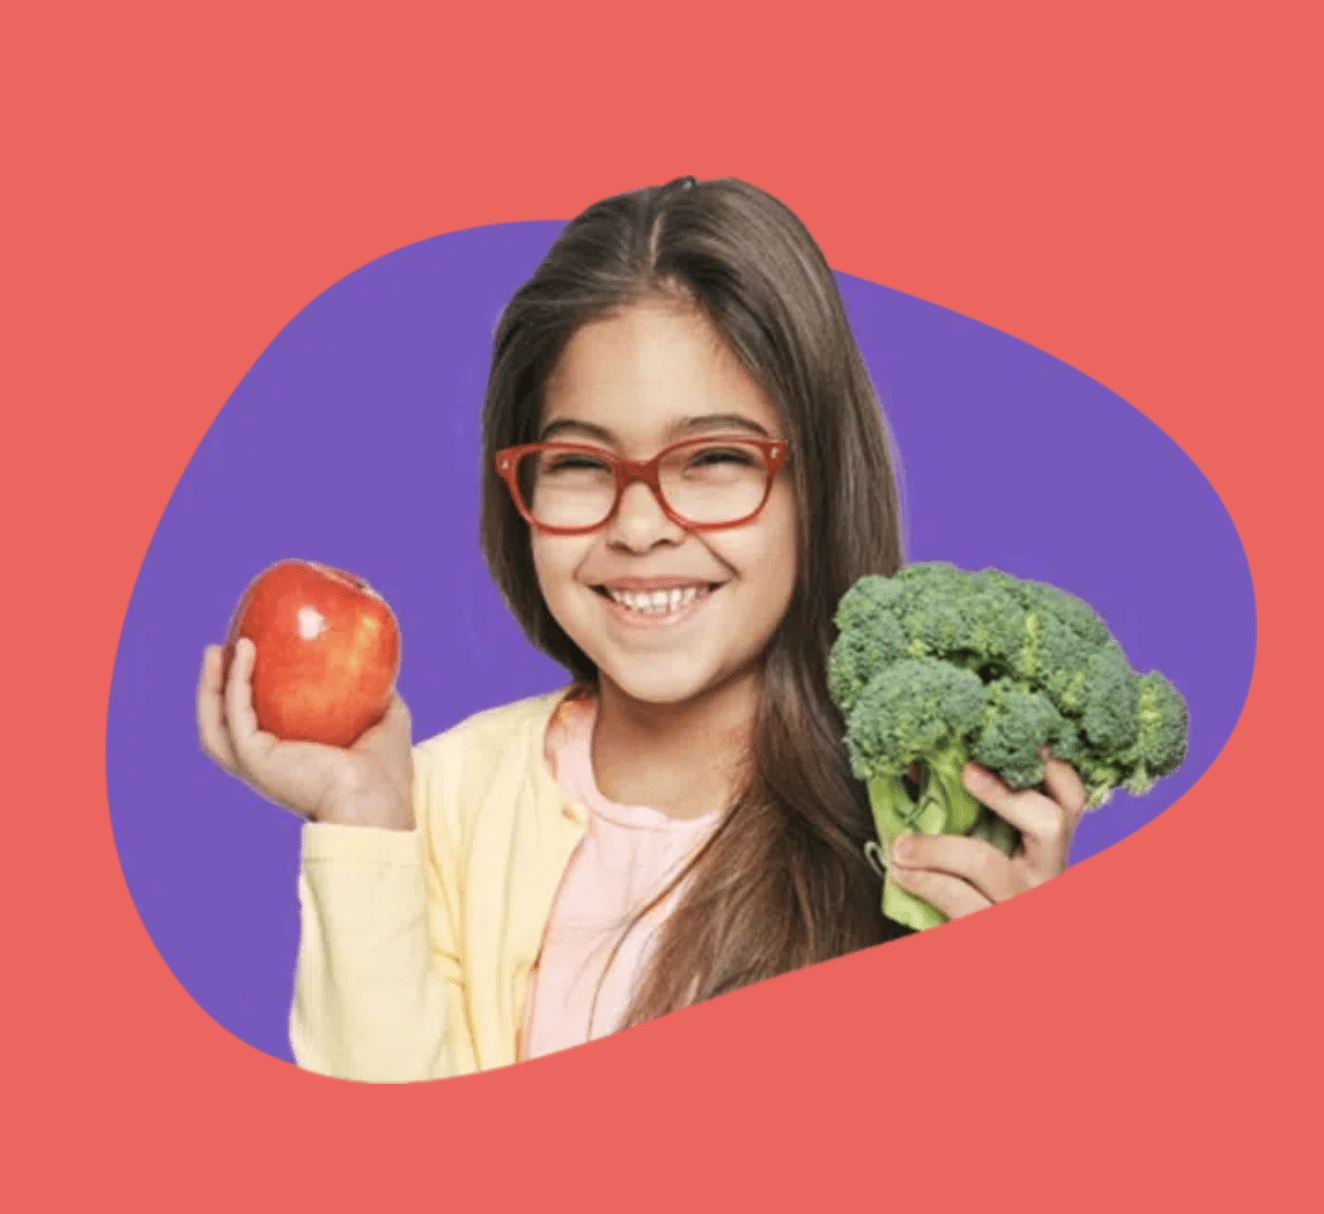 A young person wearing glasses, holds an apple in one hand and broccoli in the other, with a purple background